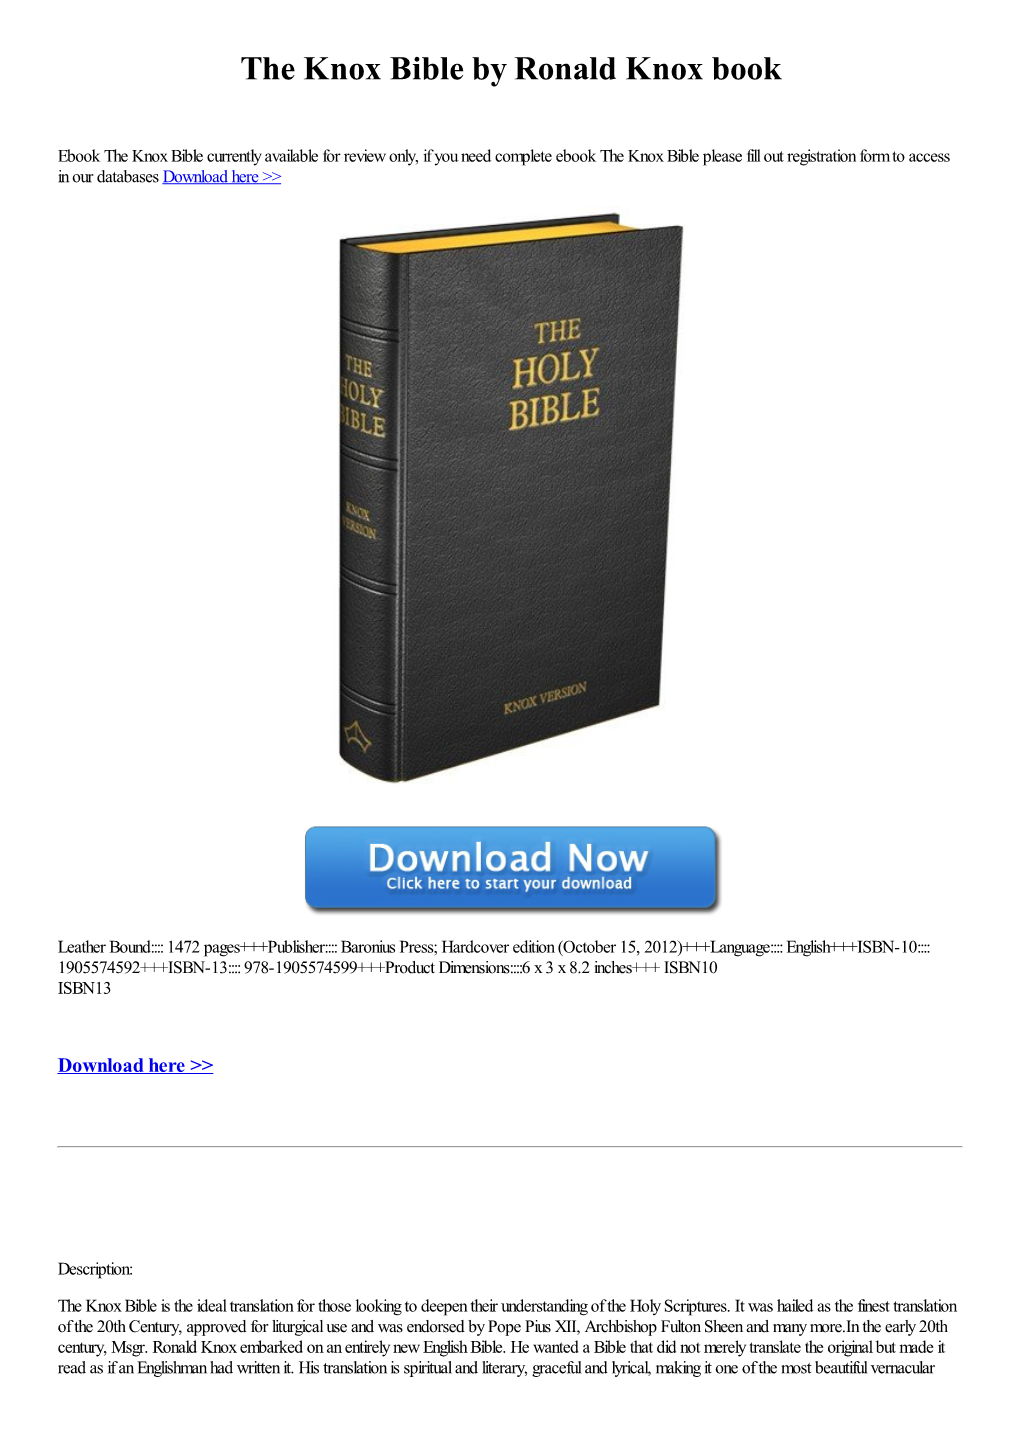 Download the Knox Bible by Ronald Knox [Book]